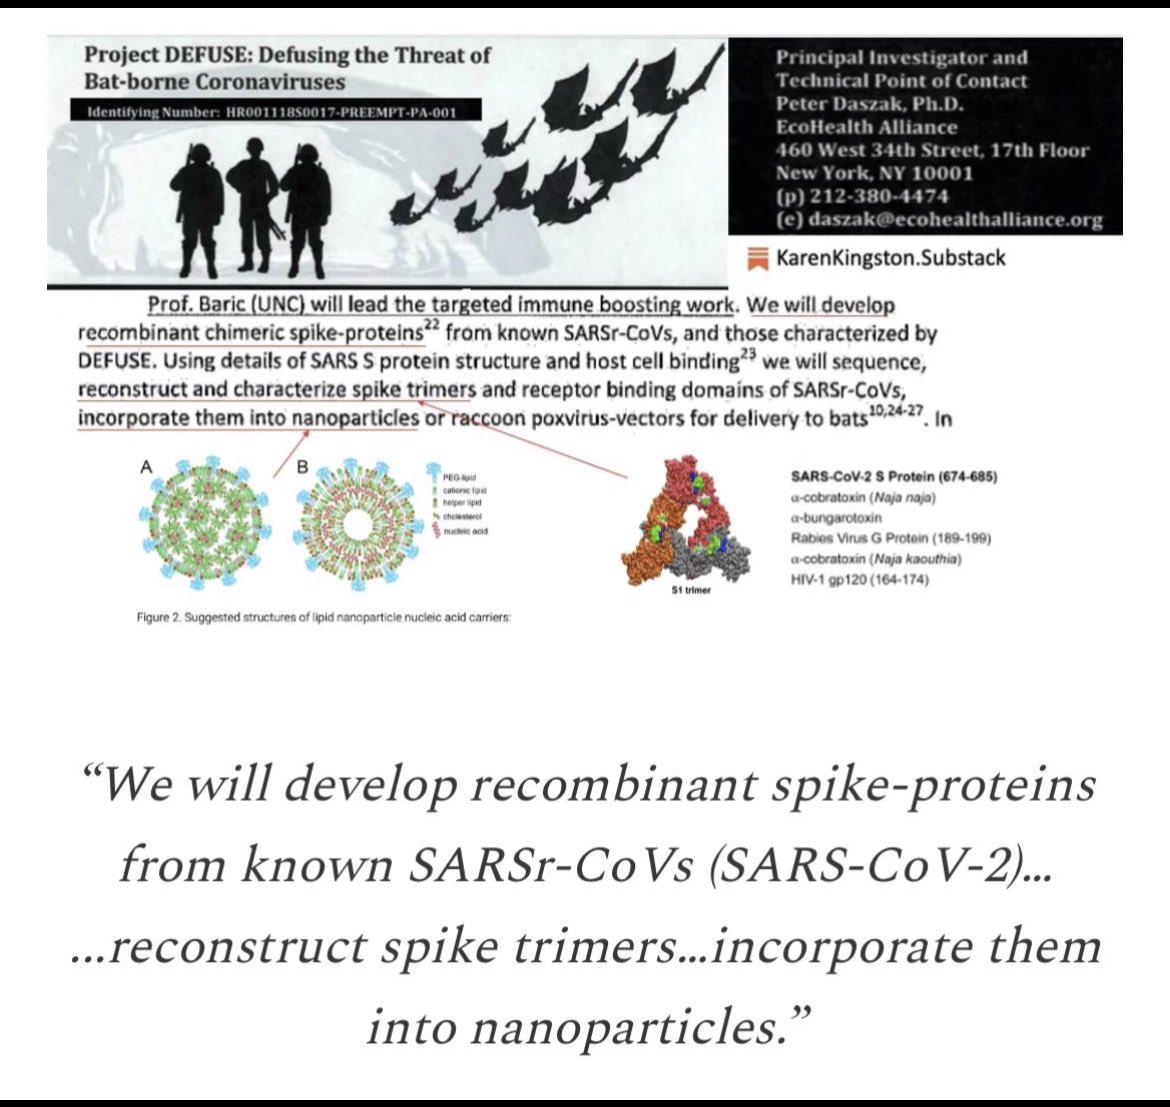 Per EcoHealth Alliance, COVID-19 is a pre-planned global bioweapon attack that used aerosolized nanoparticle 'vaccine-bioweapons', but was portrayed as a 'viral' pandemic by US and global media karenkingston.substack.com/p/what-happene…